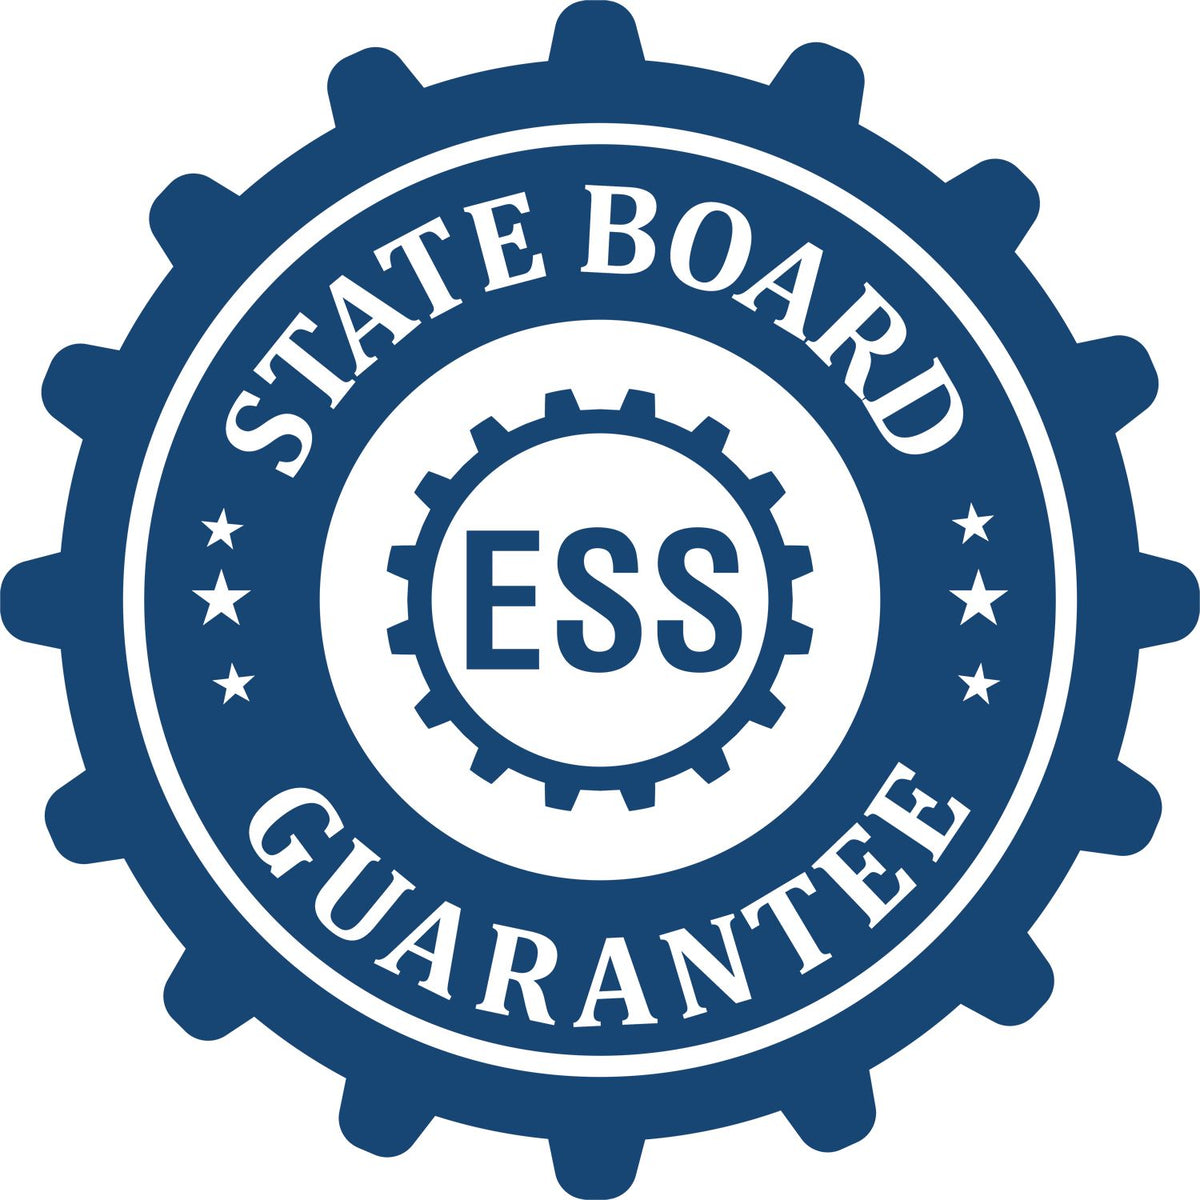 An emblem in a gear shape illustrating a state board guarantee for the Hybrid Wyoming Geologist Seal